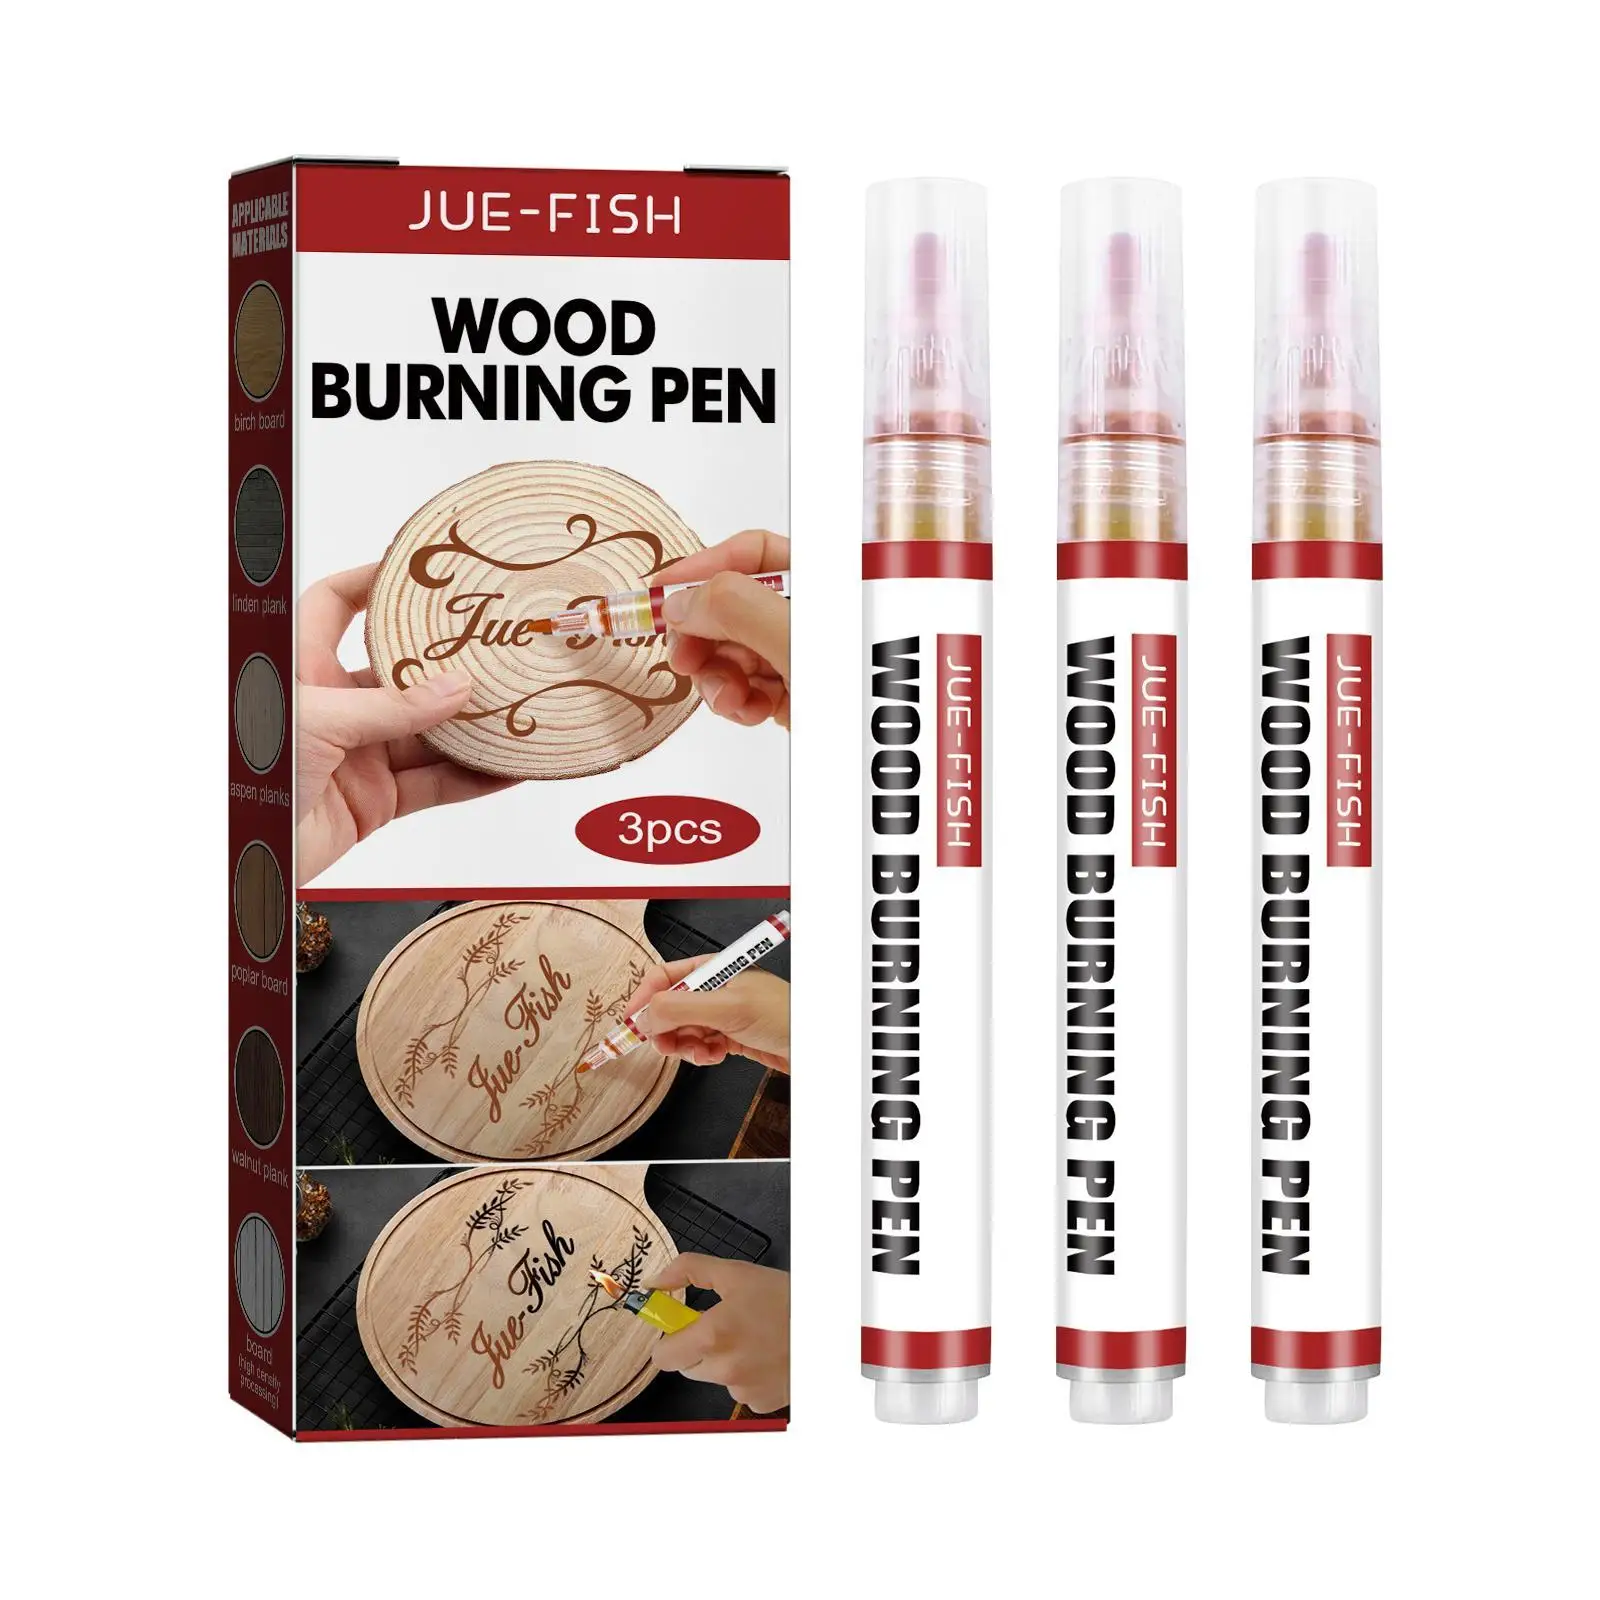 

3pcs Wood Burning Pen DIY Wood Craft Project Painting Pen Fine Tip Chemical Scorch Marker Pen Pyrography Wooden Scorch Pen Layer